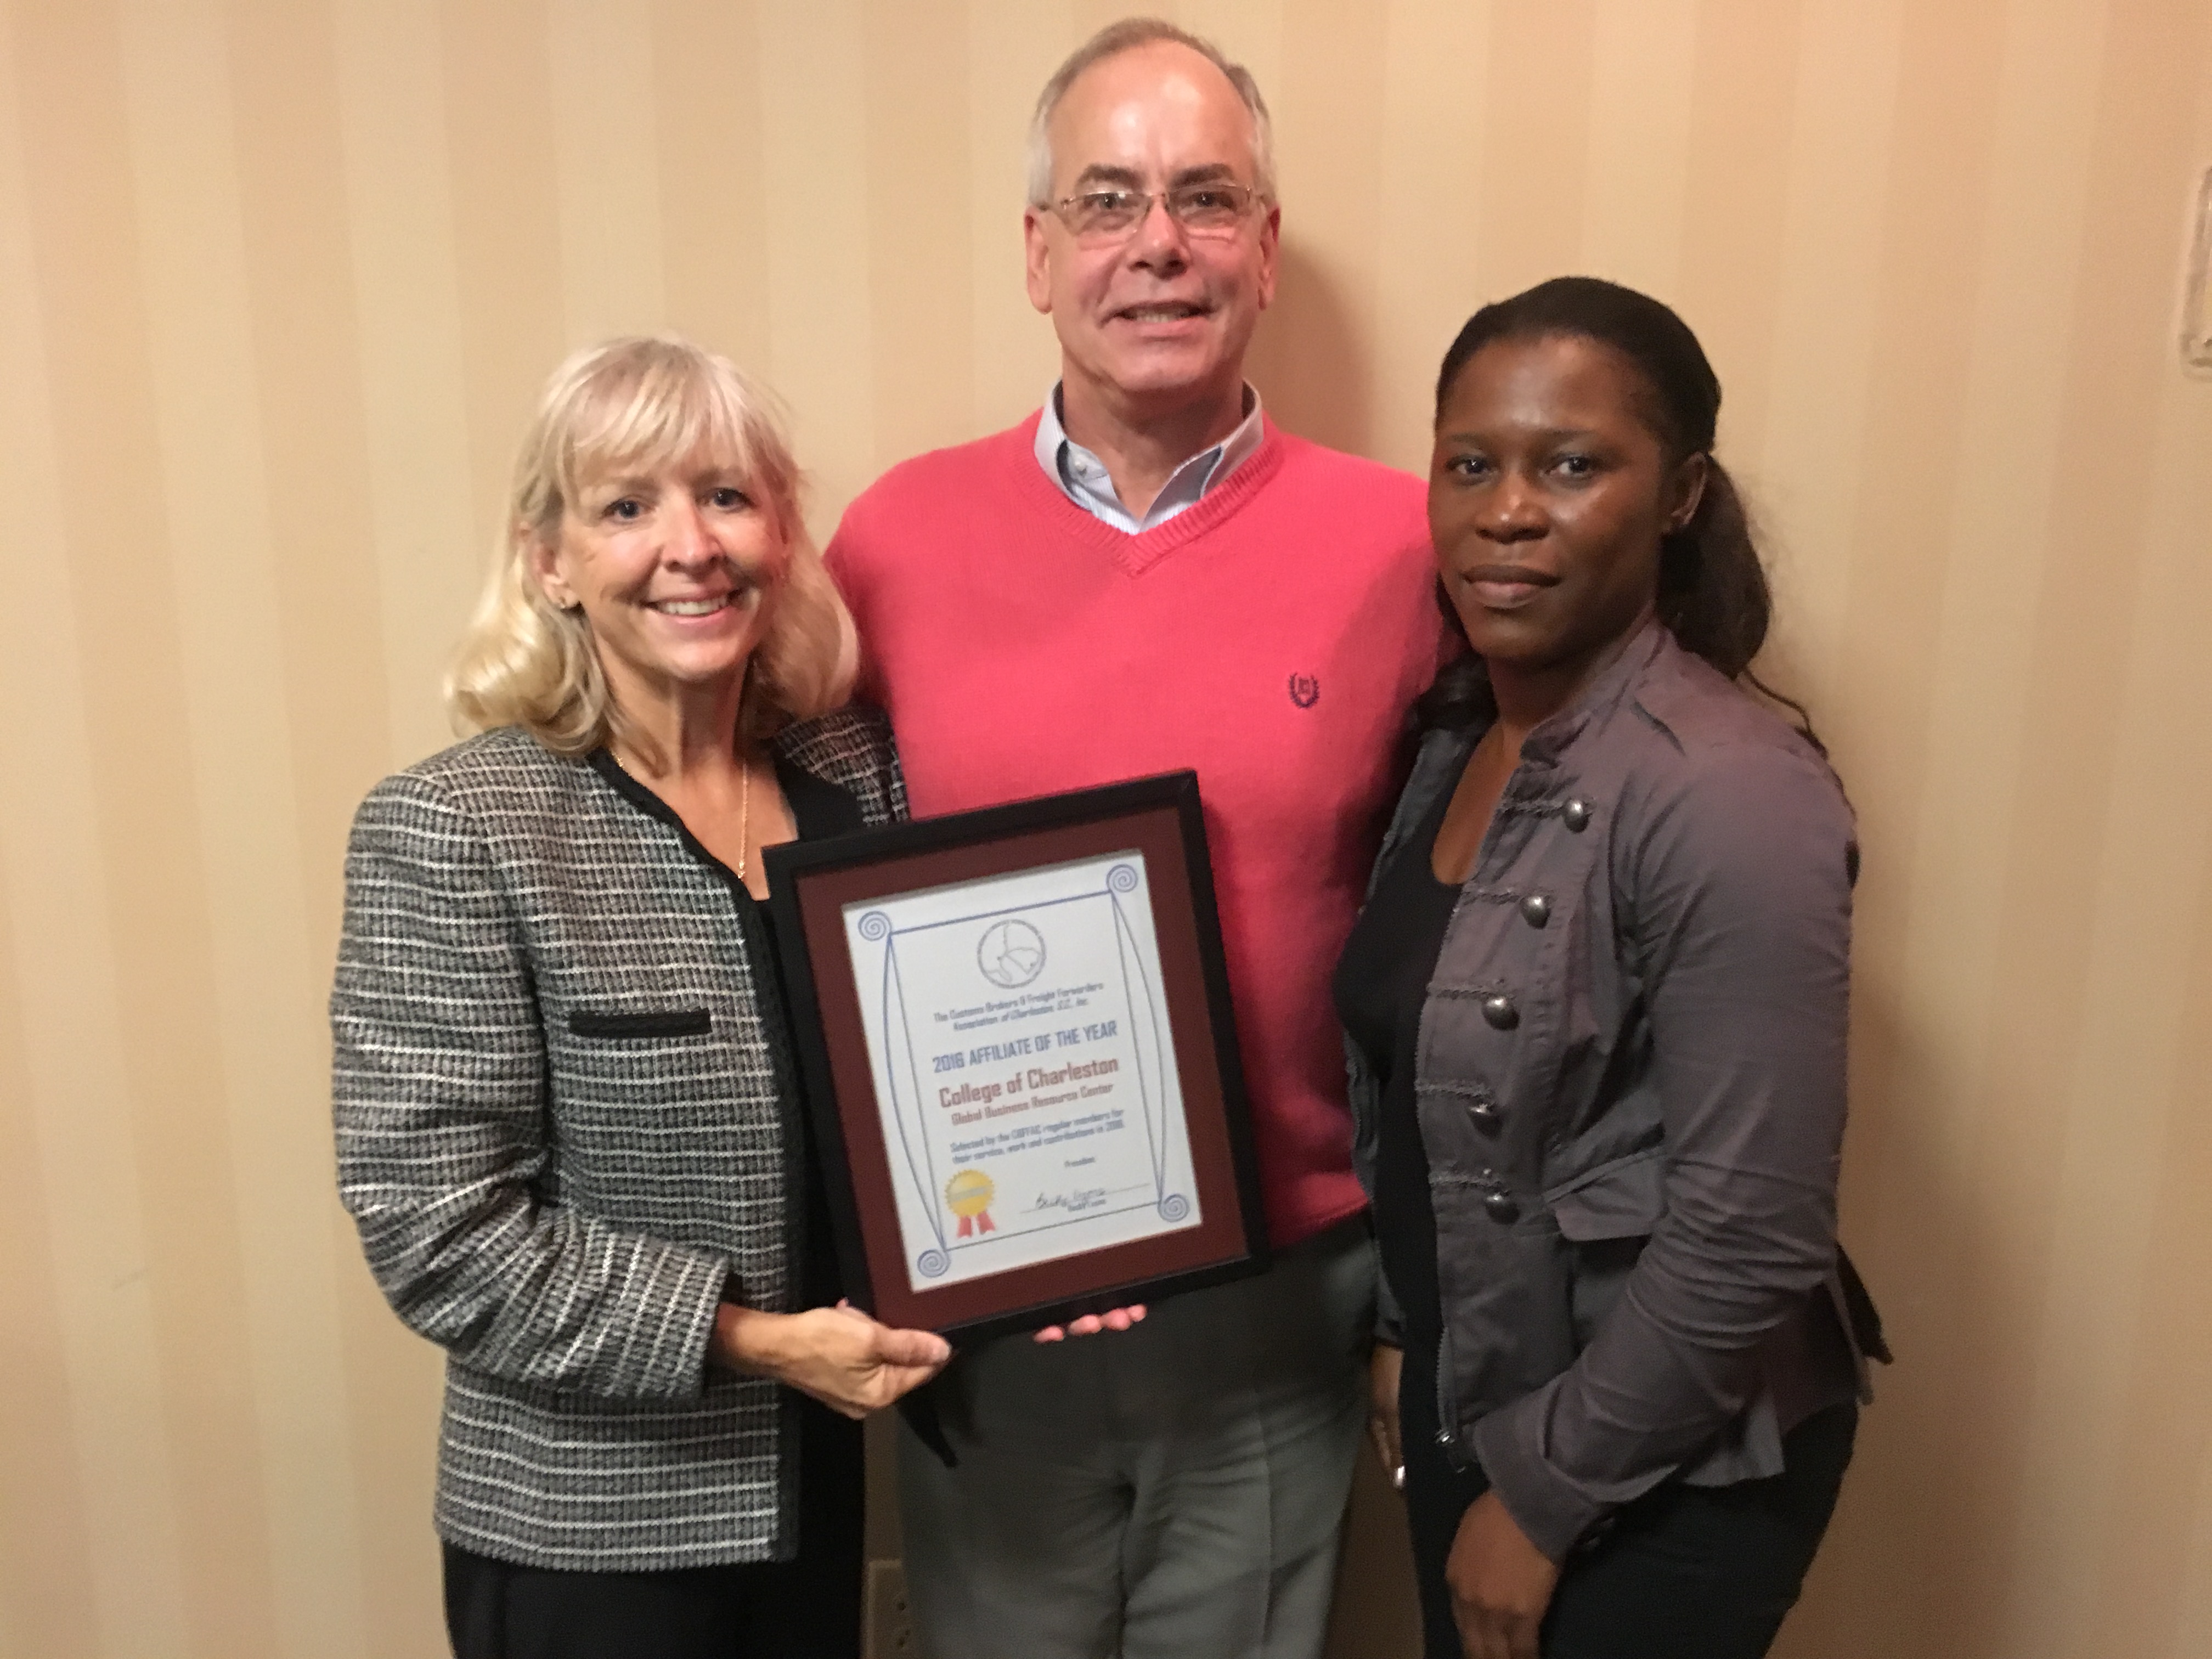 School of Business’ Global Business Resource Center Honored by Local Association